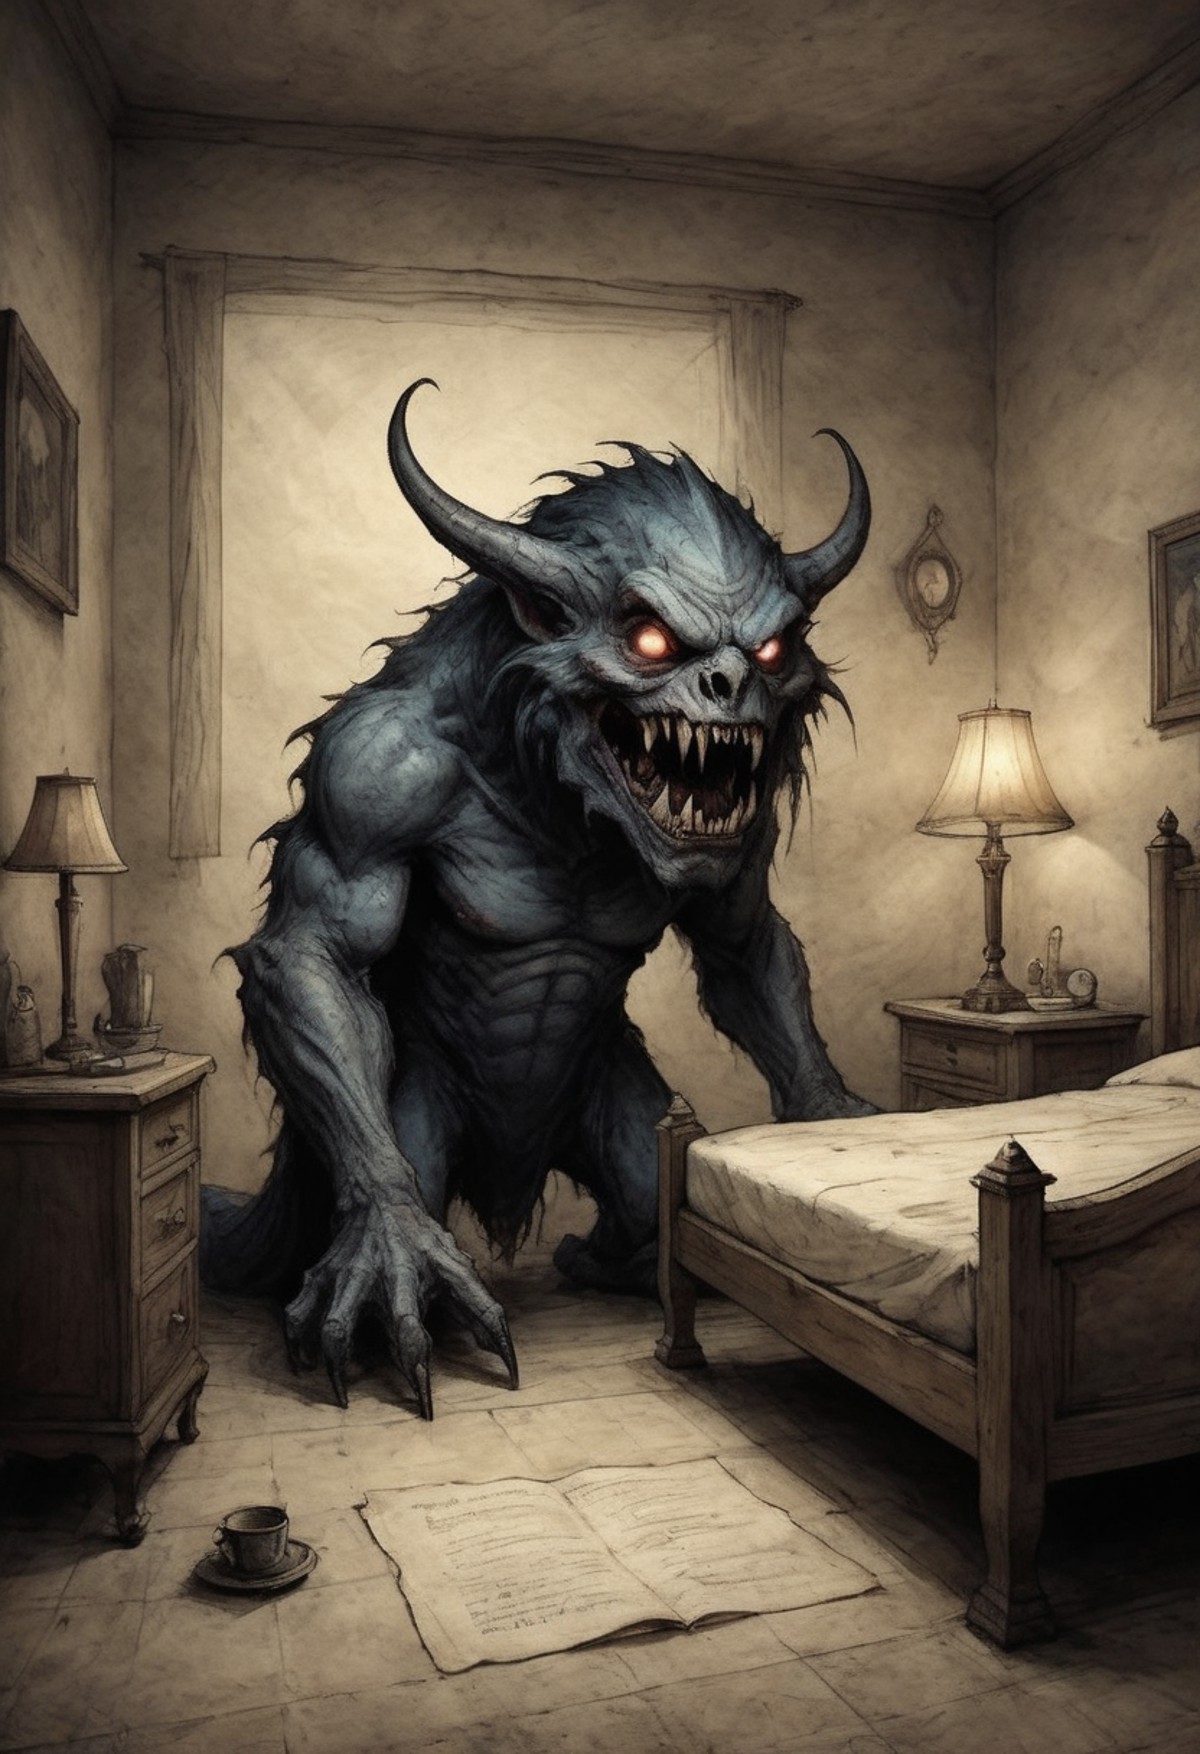 on parchment the monster from under the bed lurks on the floor menacing terrifying nighttime beast